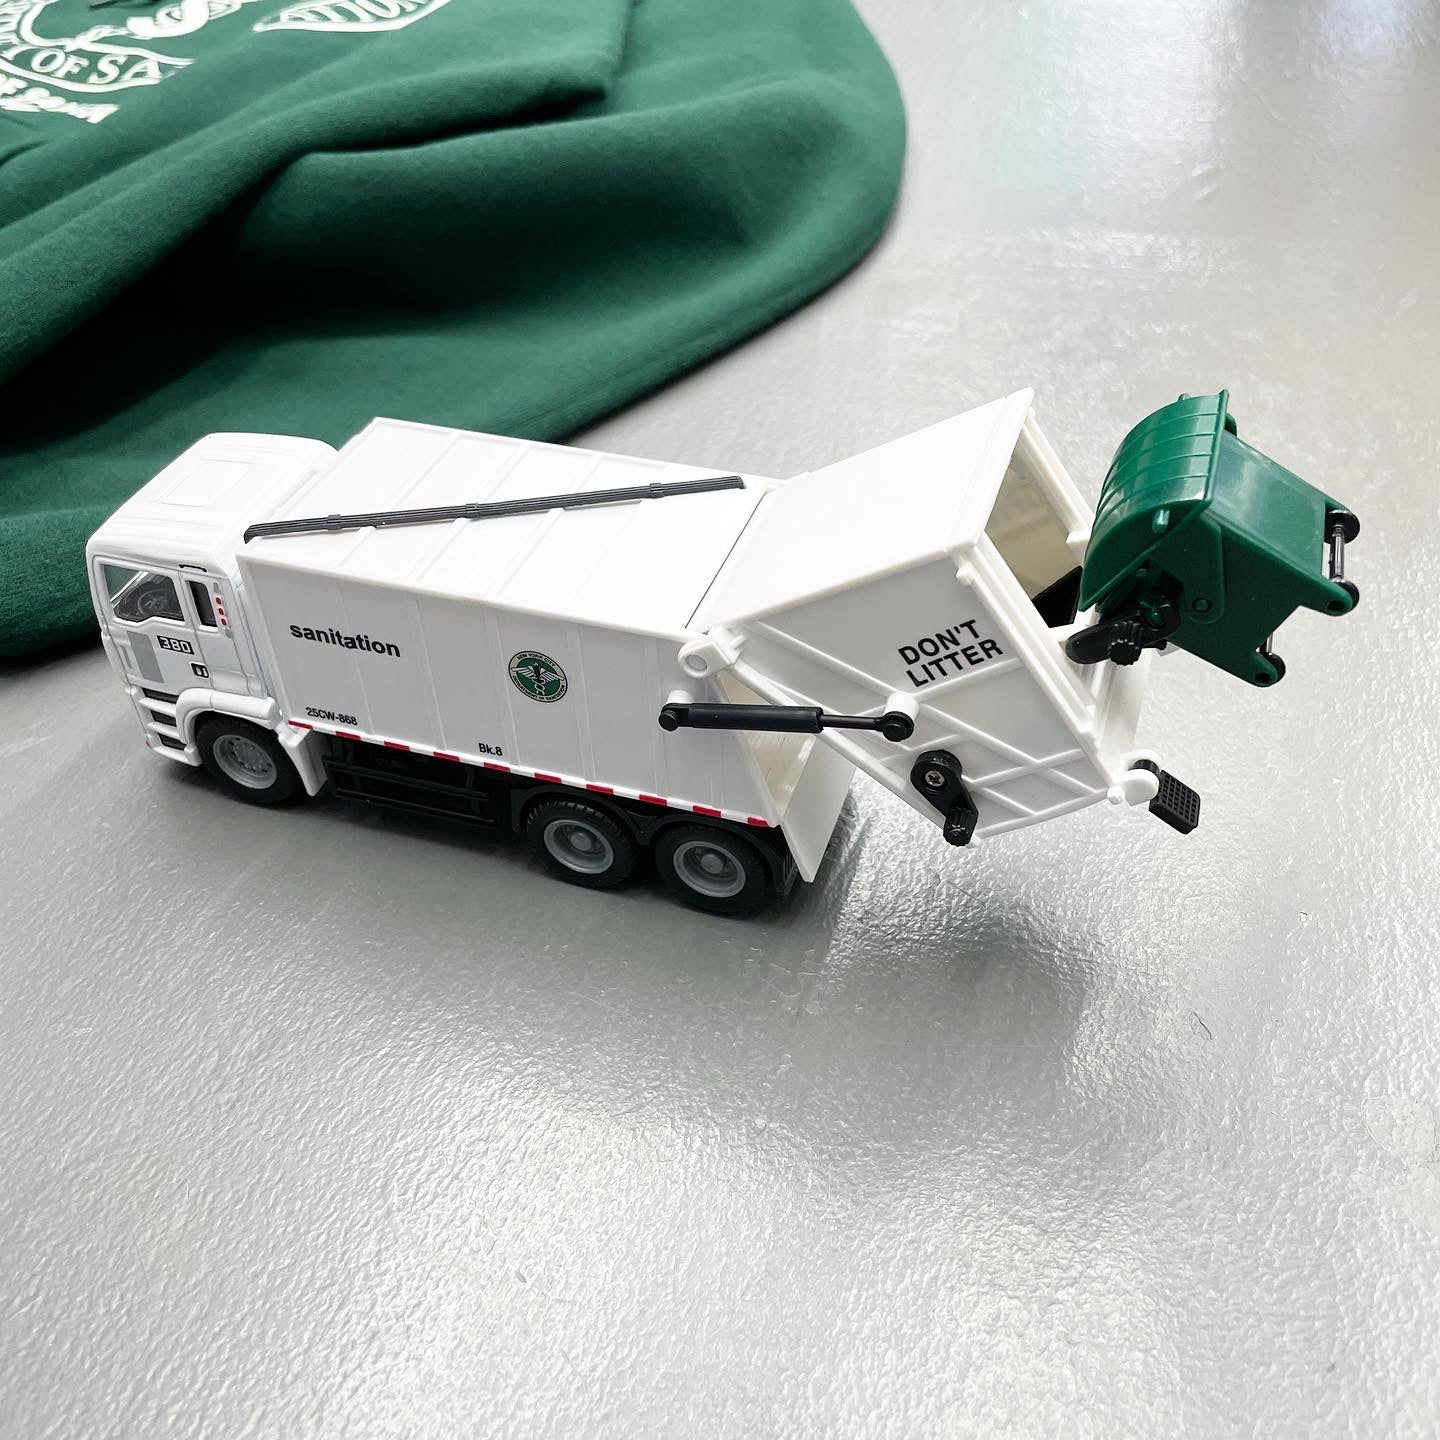 DSNY Official Garbage Truck Toy by DARON Inc.